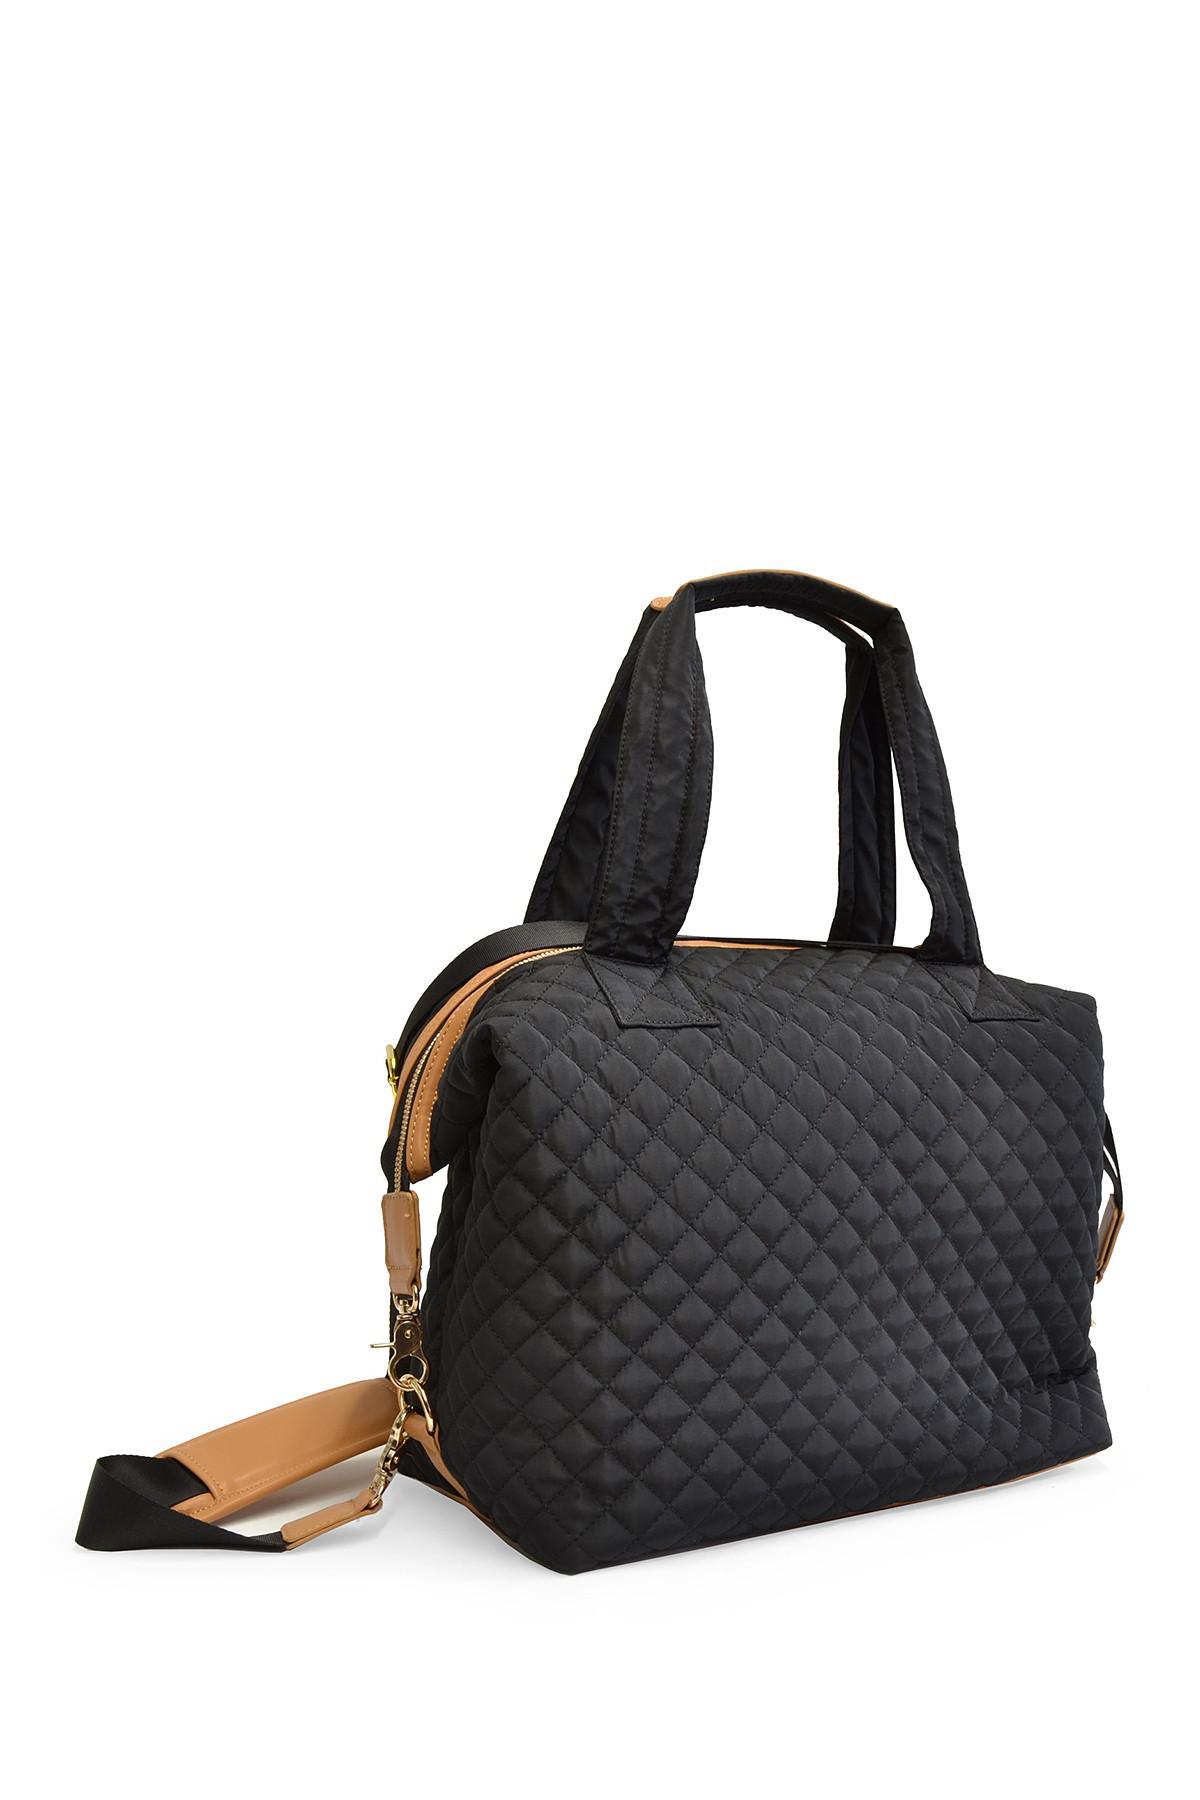 Adrienne Vittadini Synthetic Quilted Duffel Bag in Black - Lyst